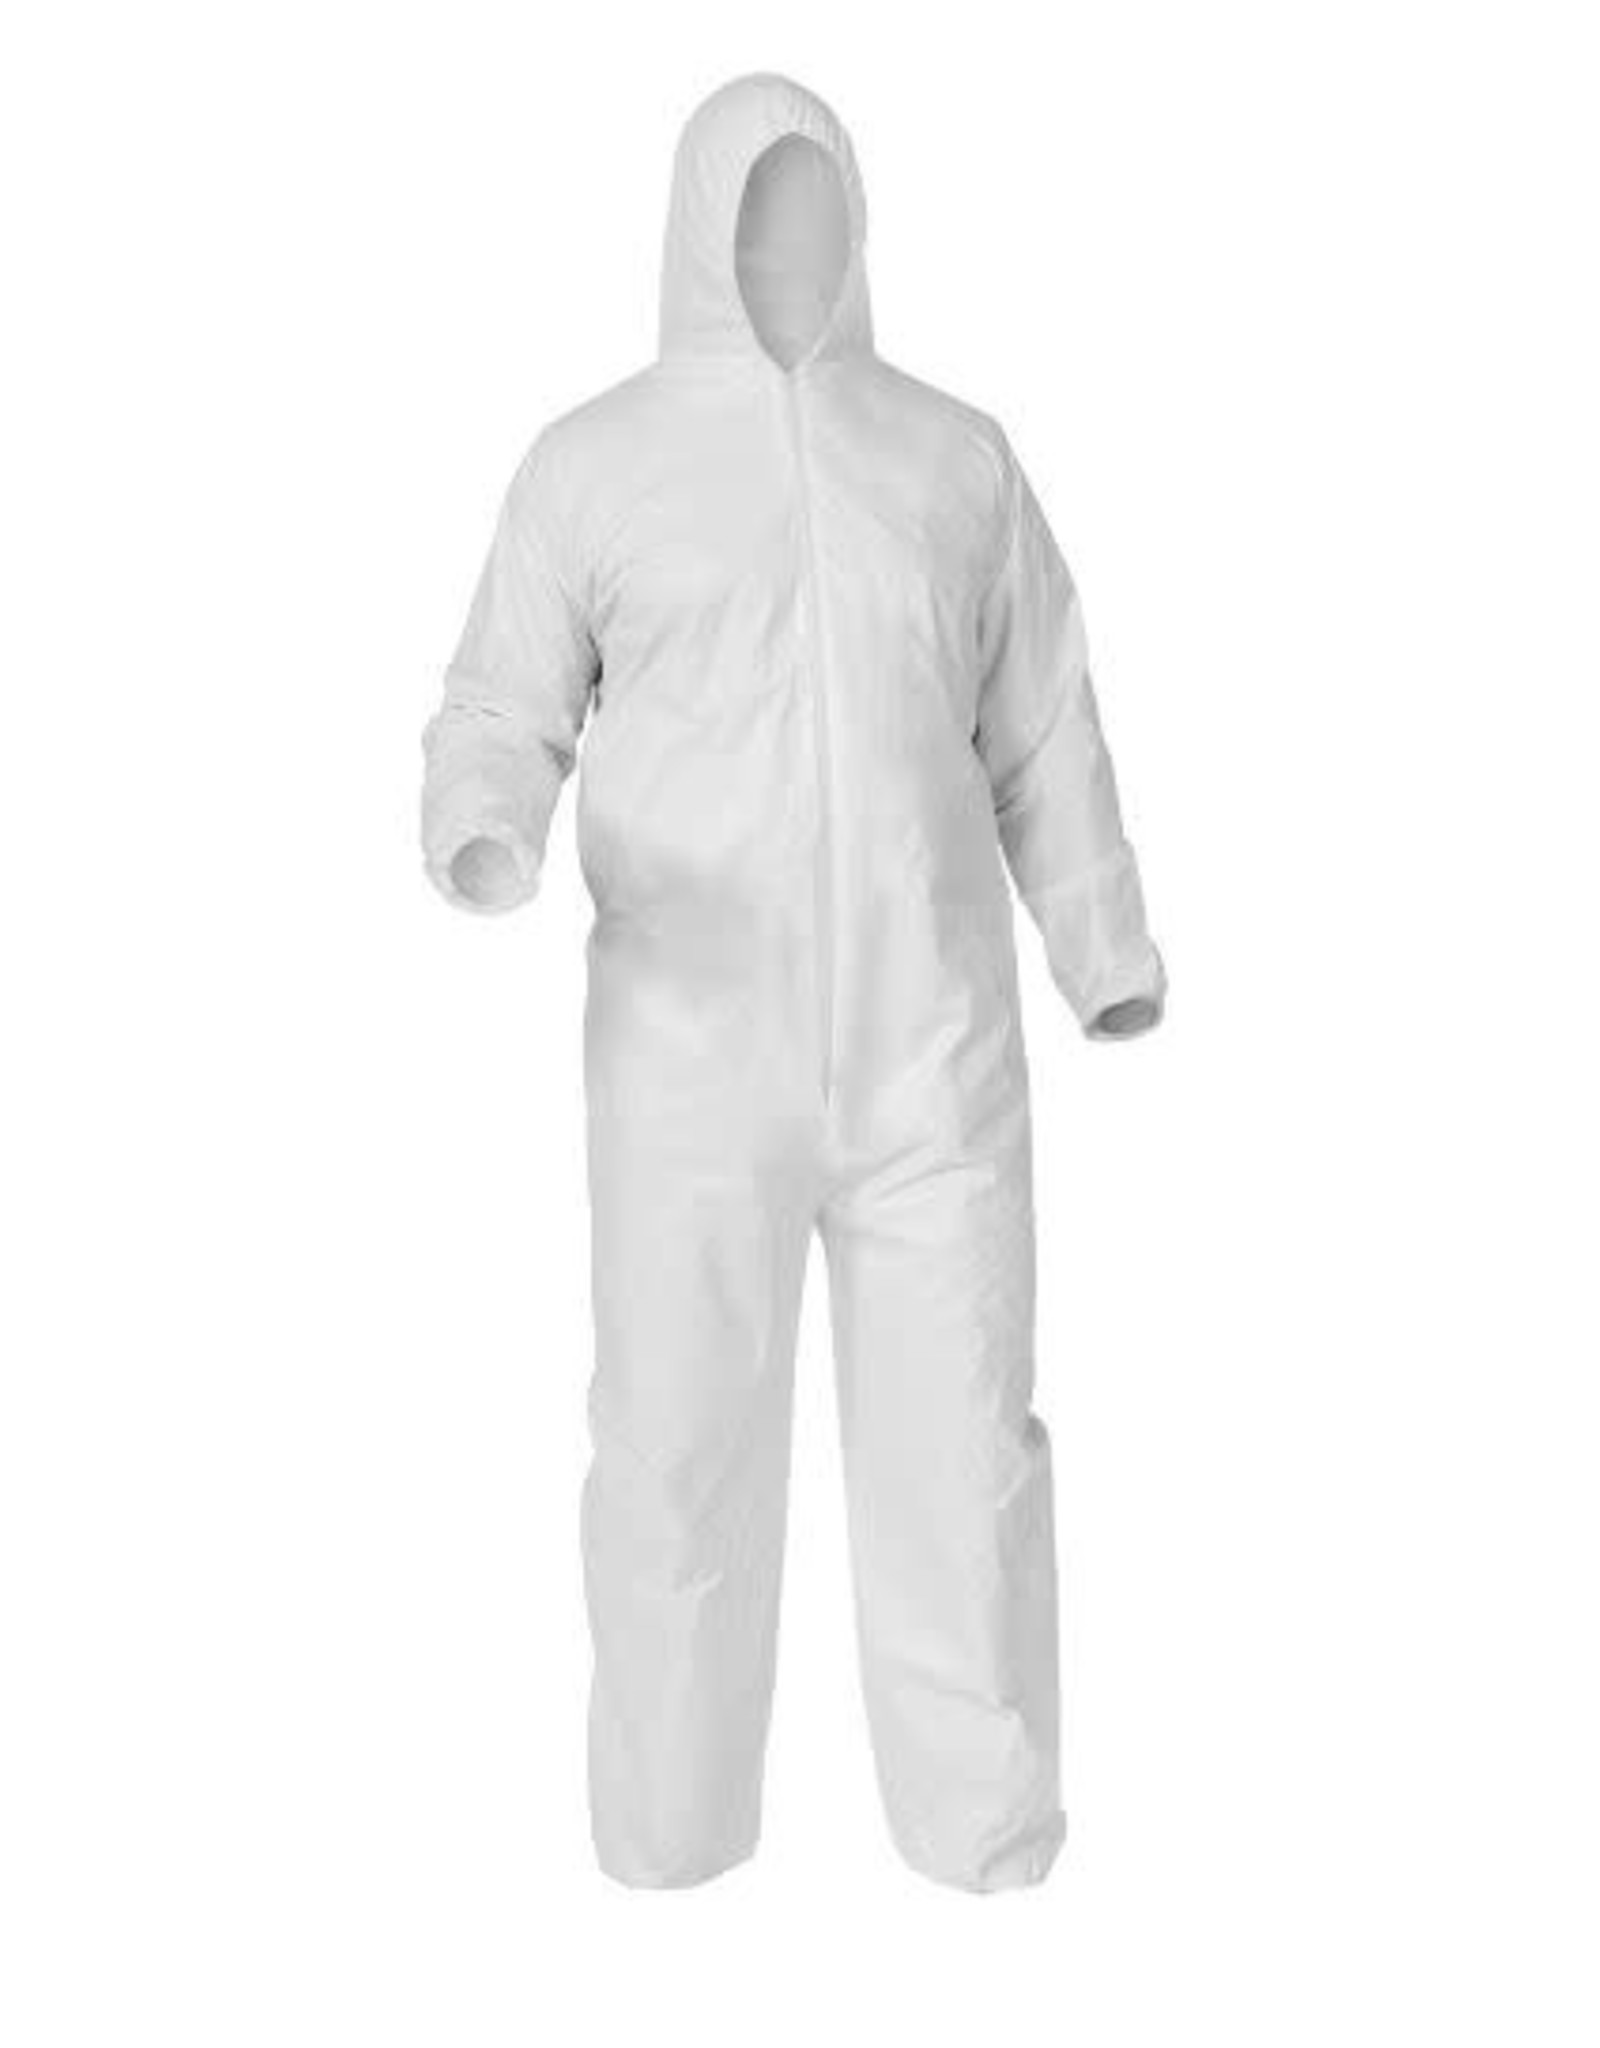 KC Kleenguard A35 Disposable Coverall w/Hood